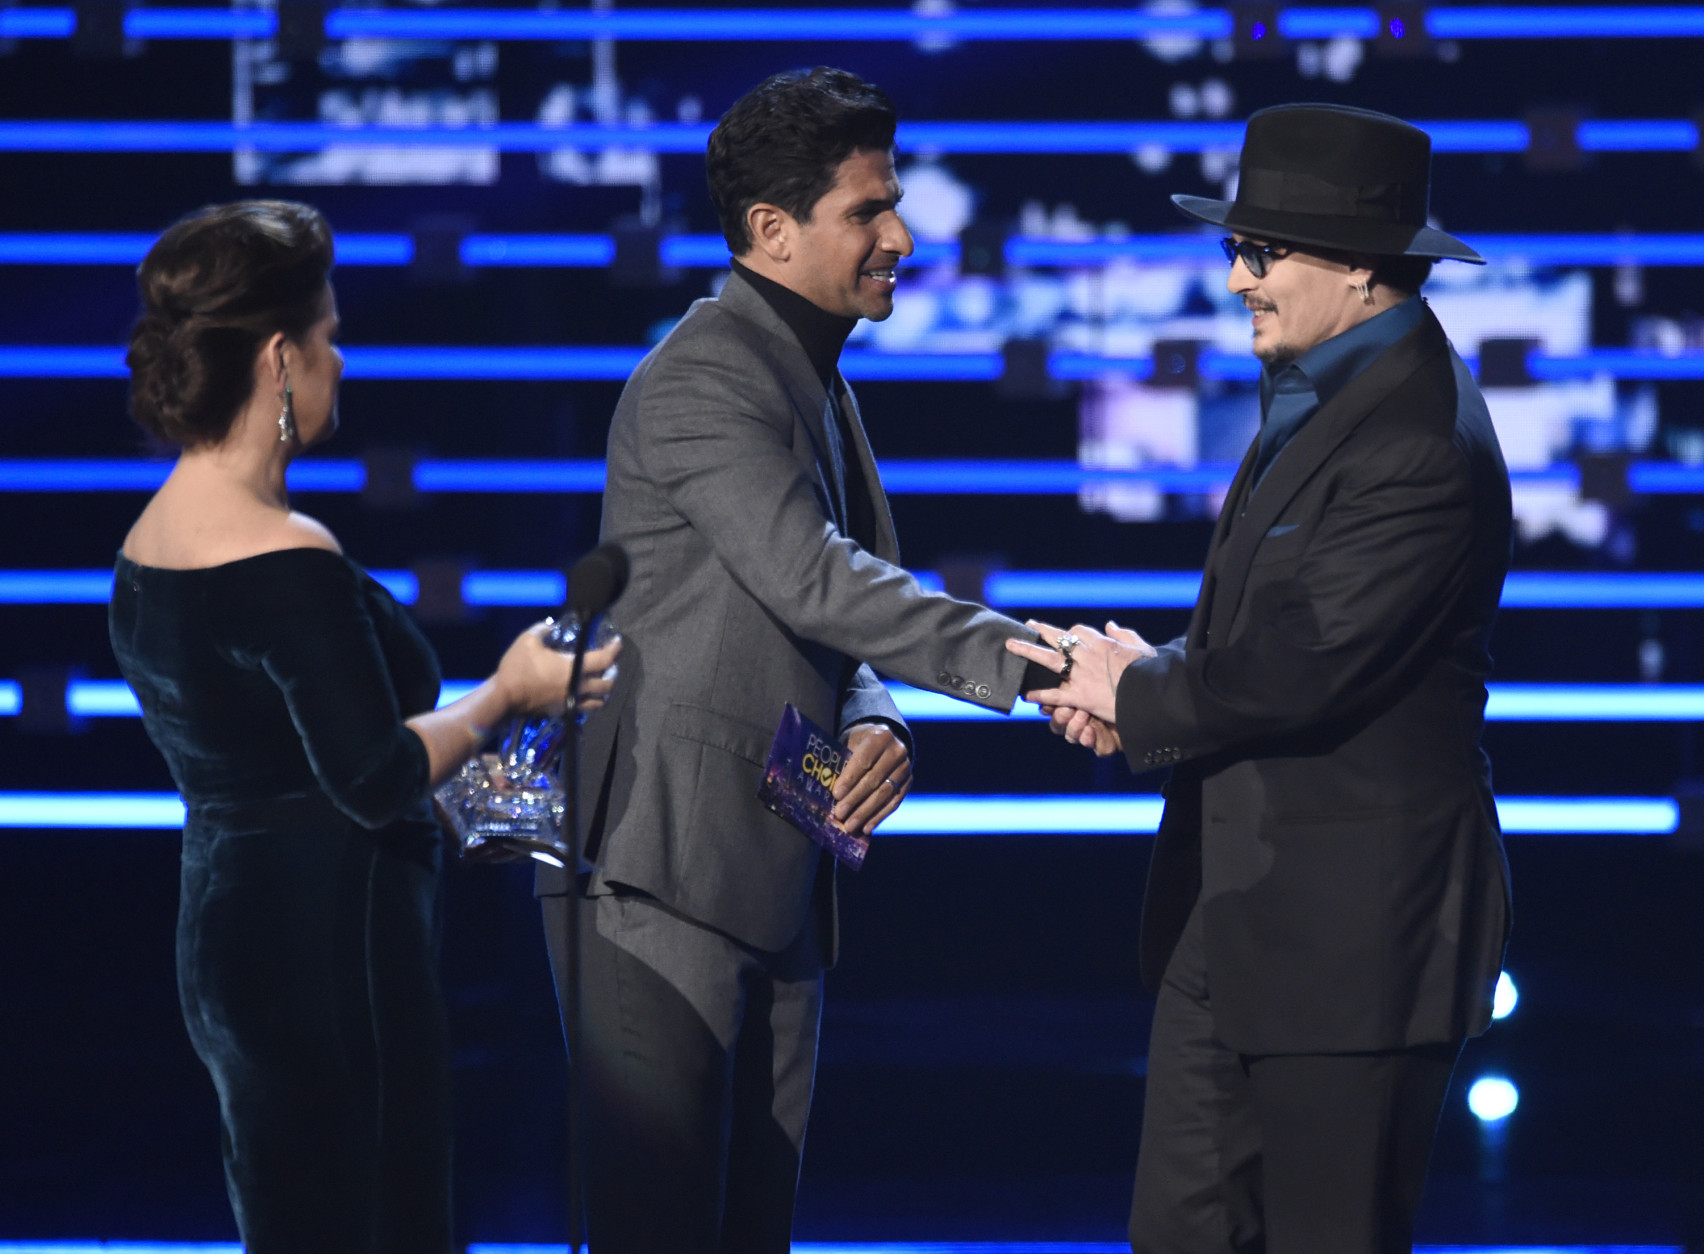 Marcia Gay Harden, left, and Raza Jaffrey present the award for favorite dramatic movie actor to Johnny Depp for "Black Mass" at the People's Choice Awards at the Microsoft Theater on Wednesday, Jan. 6, 2016, in Los Angeles. (Photo by Chris Pizzello/Invision/AP)